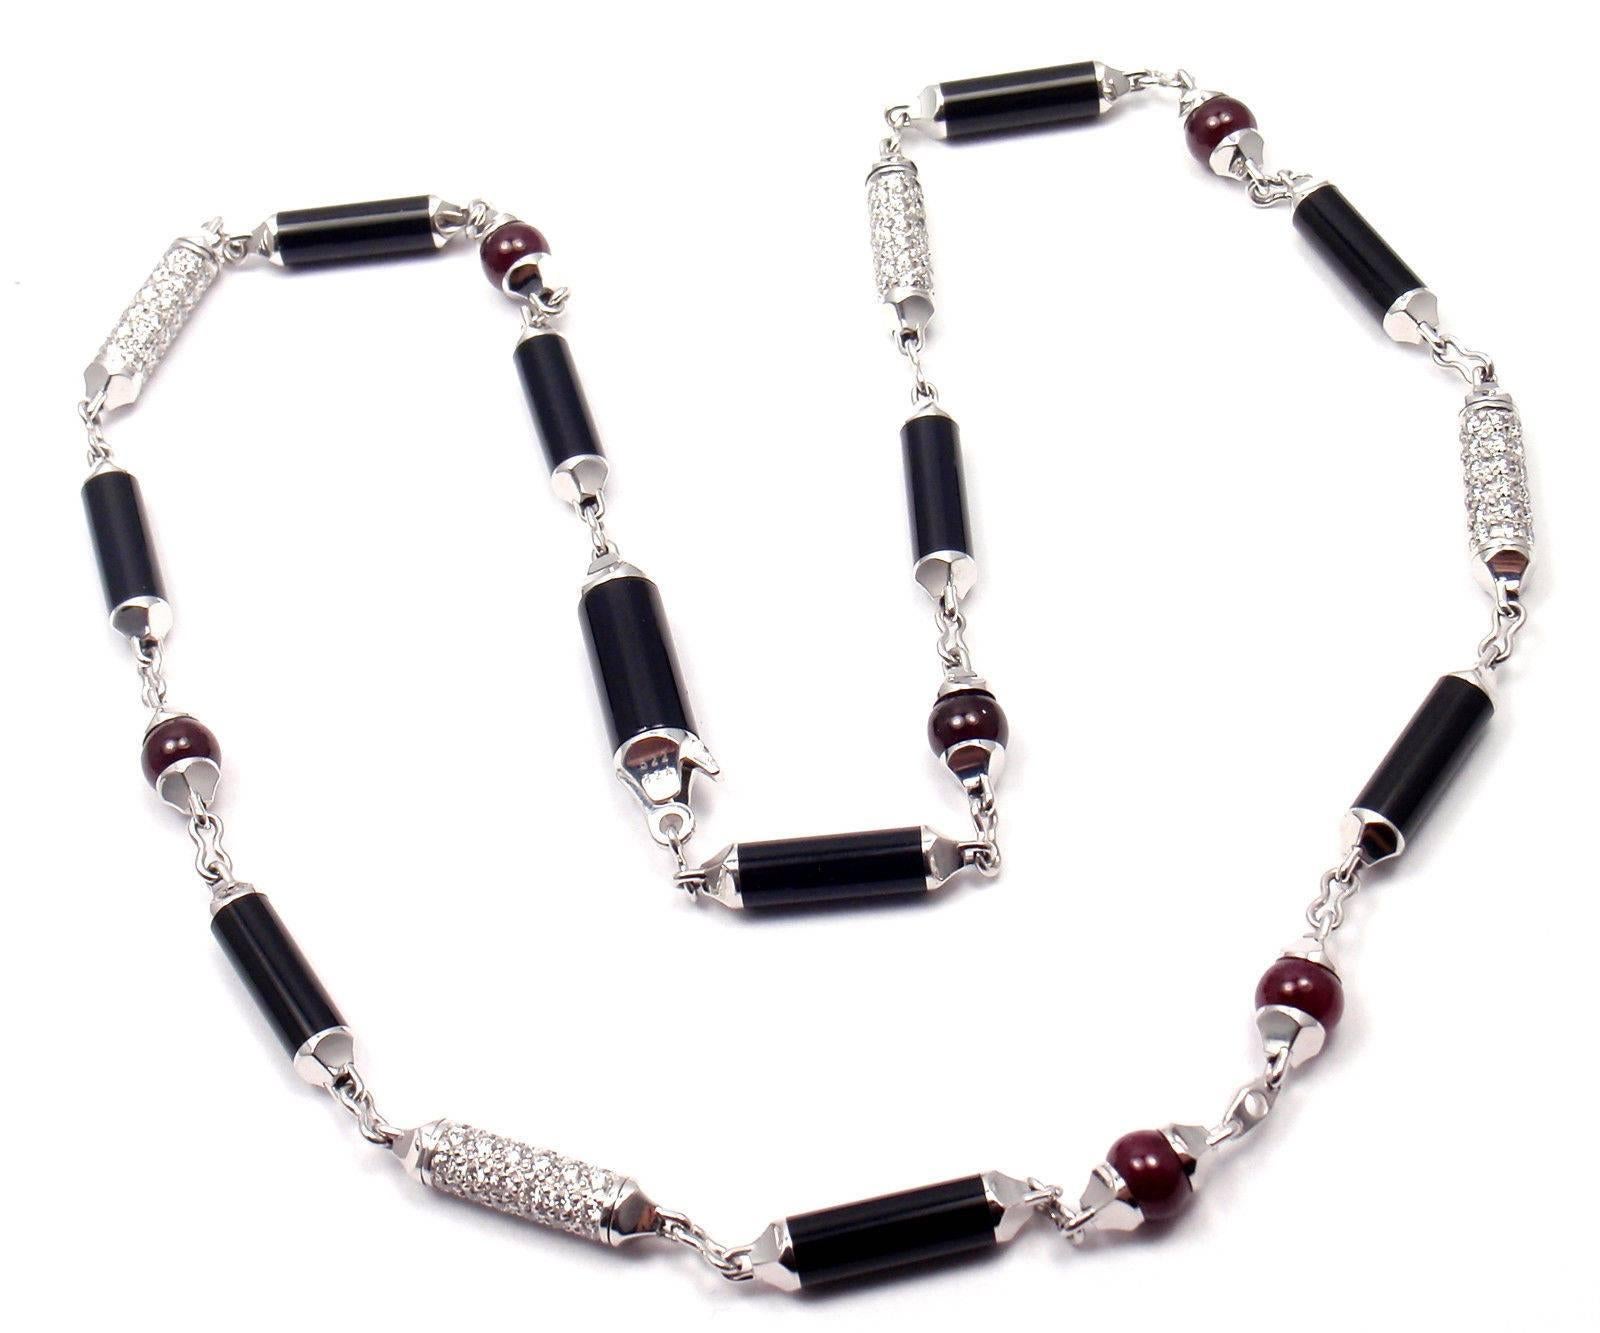 18k White Gold Diamond Black Onyx Ruby Necklace by Cartier. Part of Cartier's 